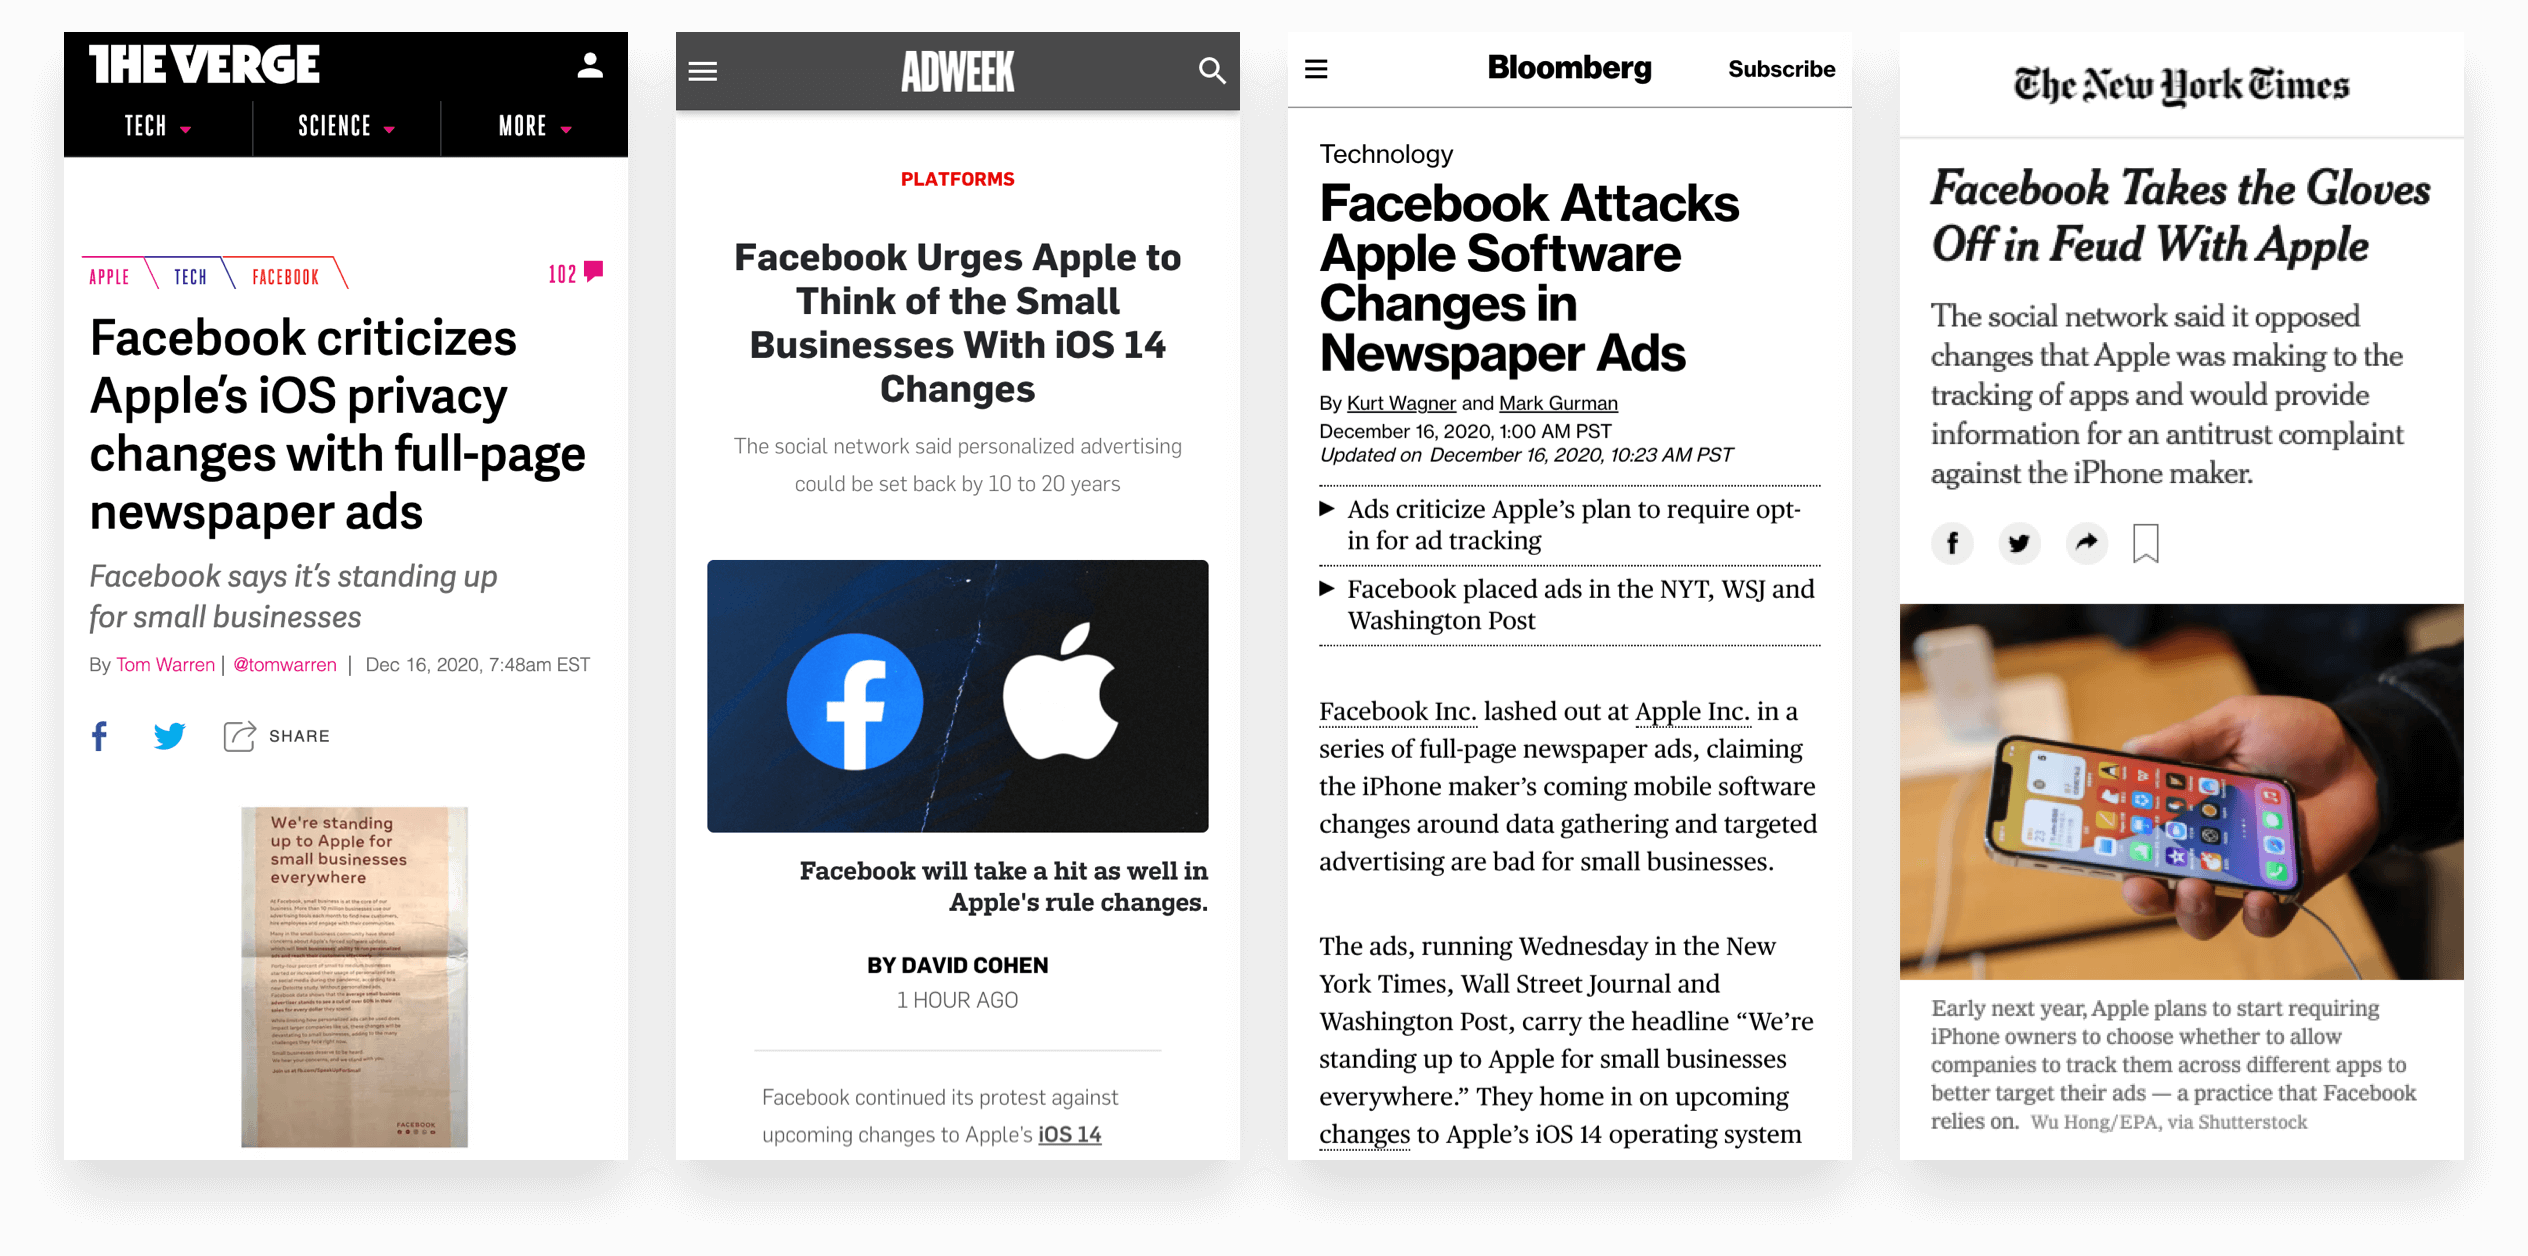 News on Facebook's Ads Attacking Apple's iOS14 Privacy and Data Update